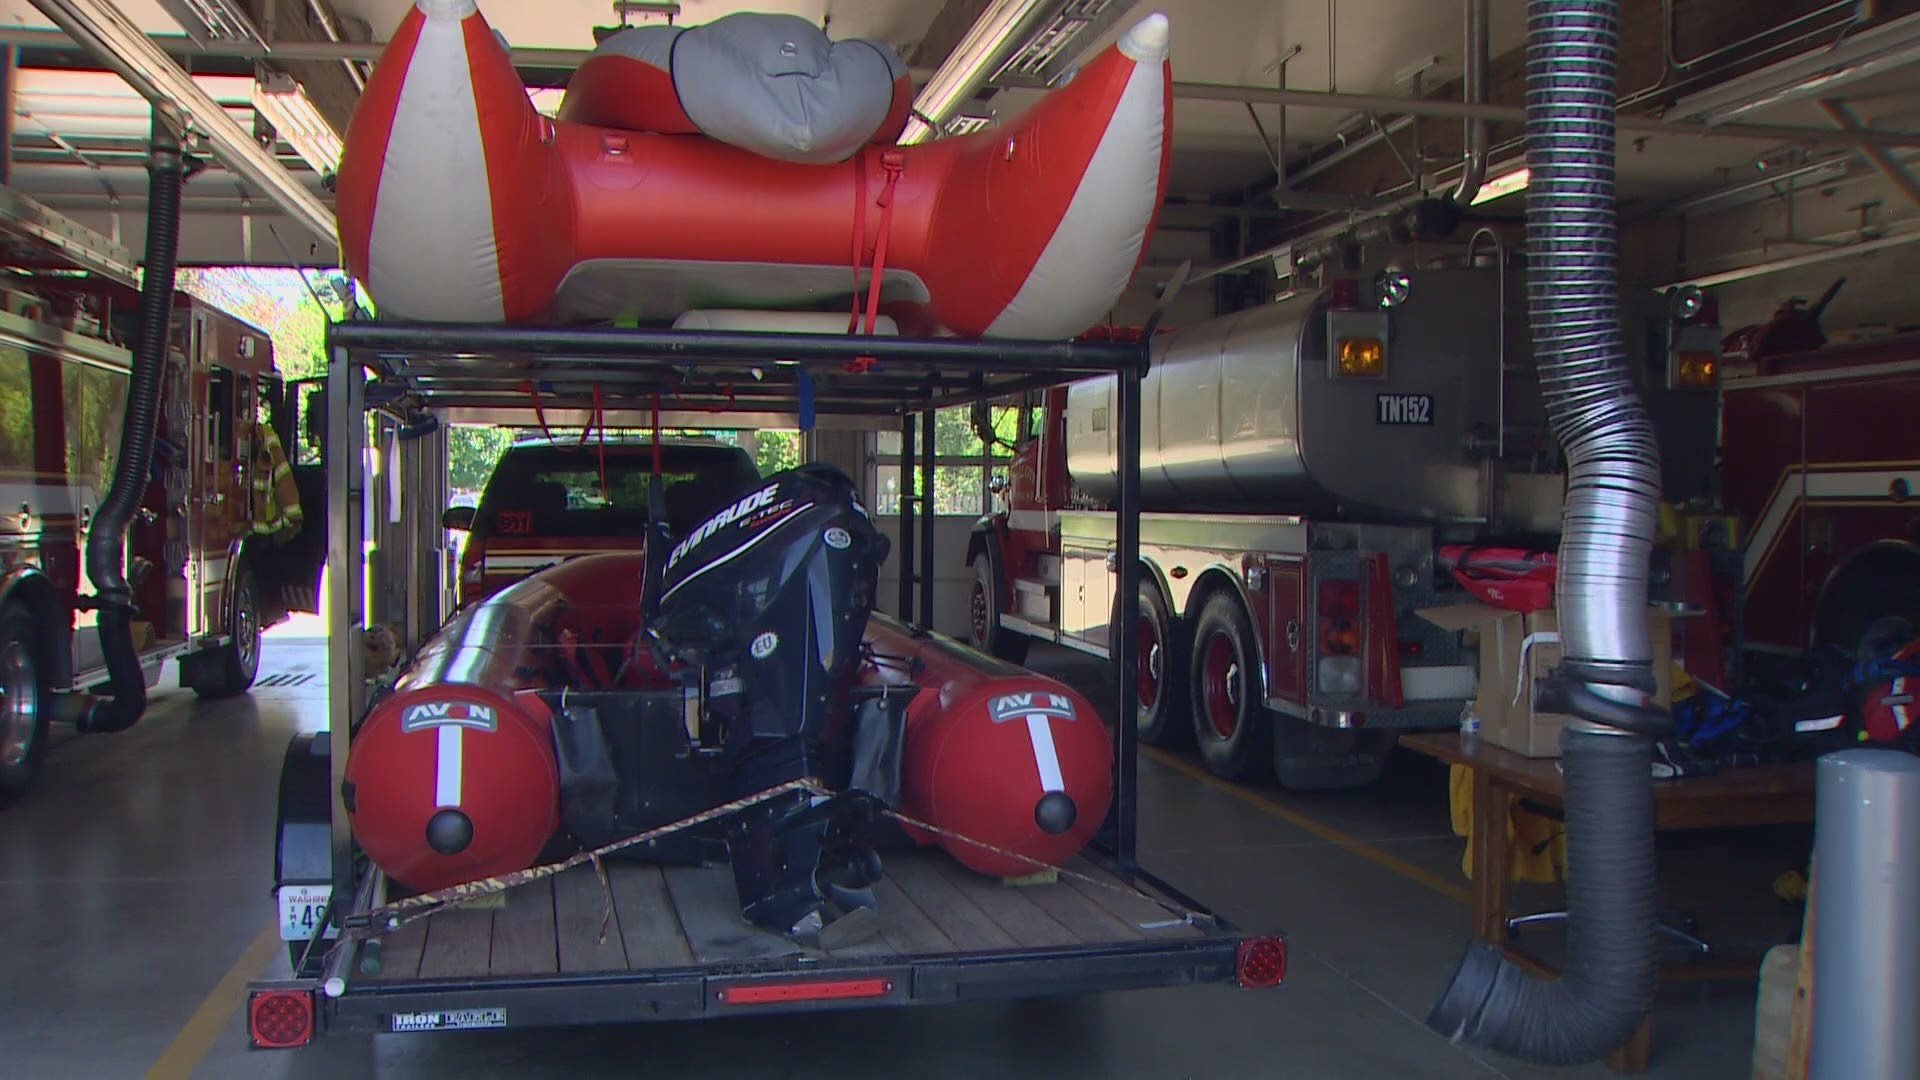 With temperatures in the triple digits, dive and rescue crews expect they'll stay busy during the heat wave.